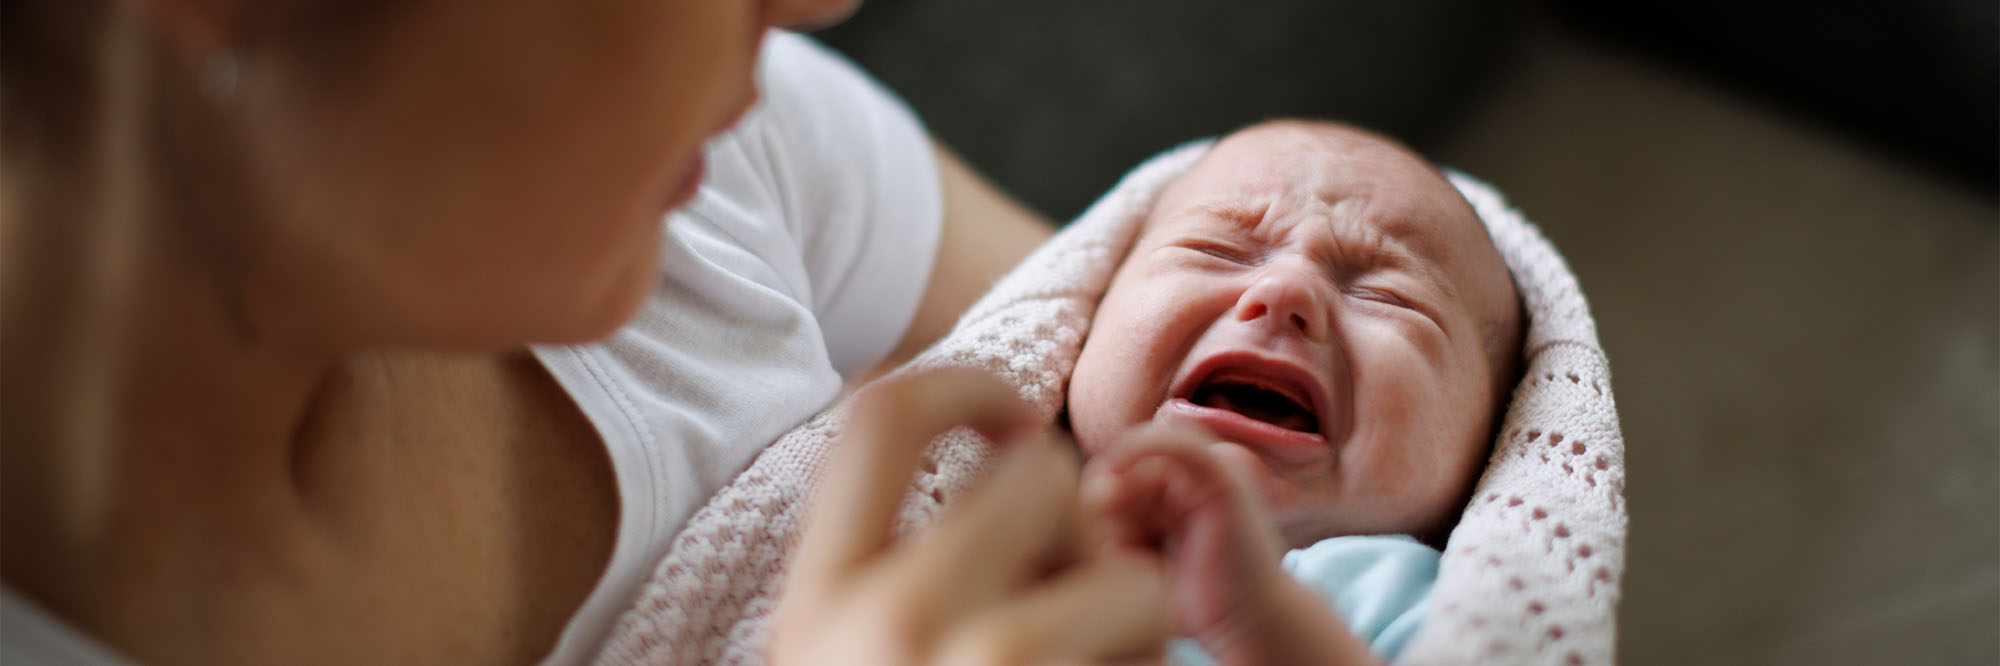 What is colic in babies, and how do you soothe it?